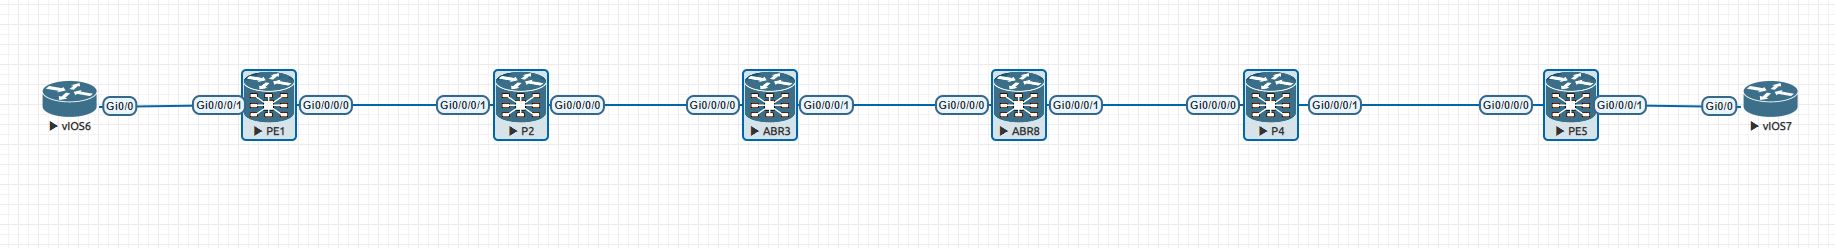 SR Unified MPLS Topology